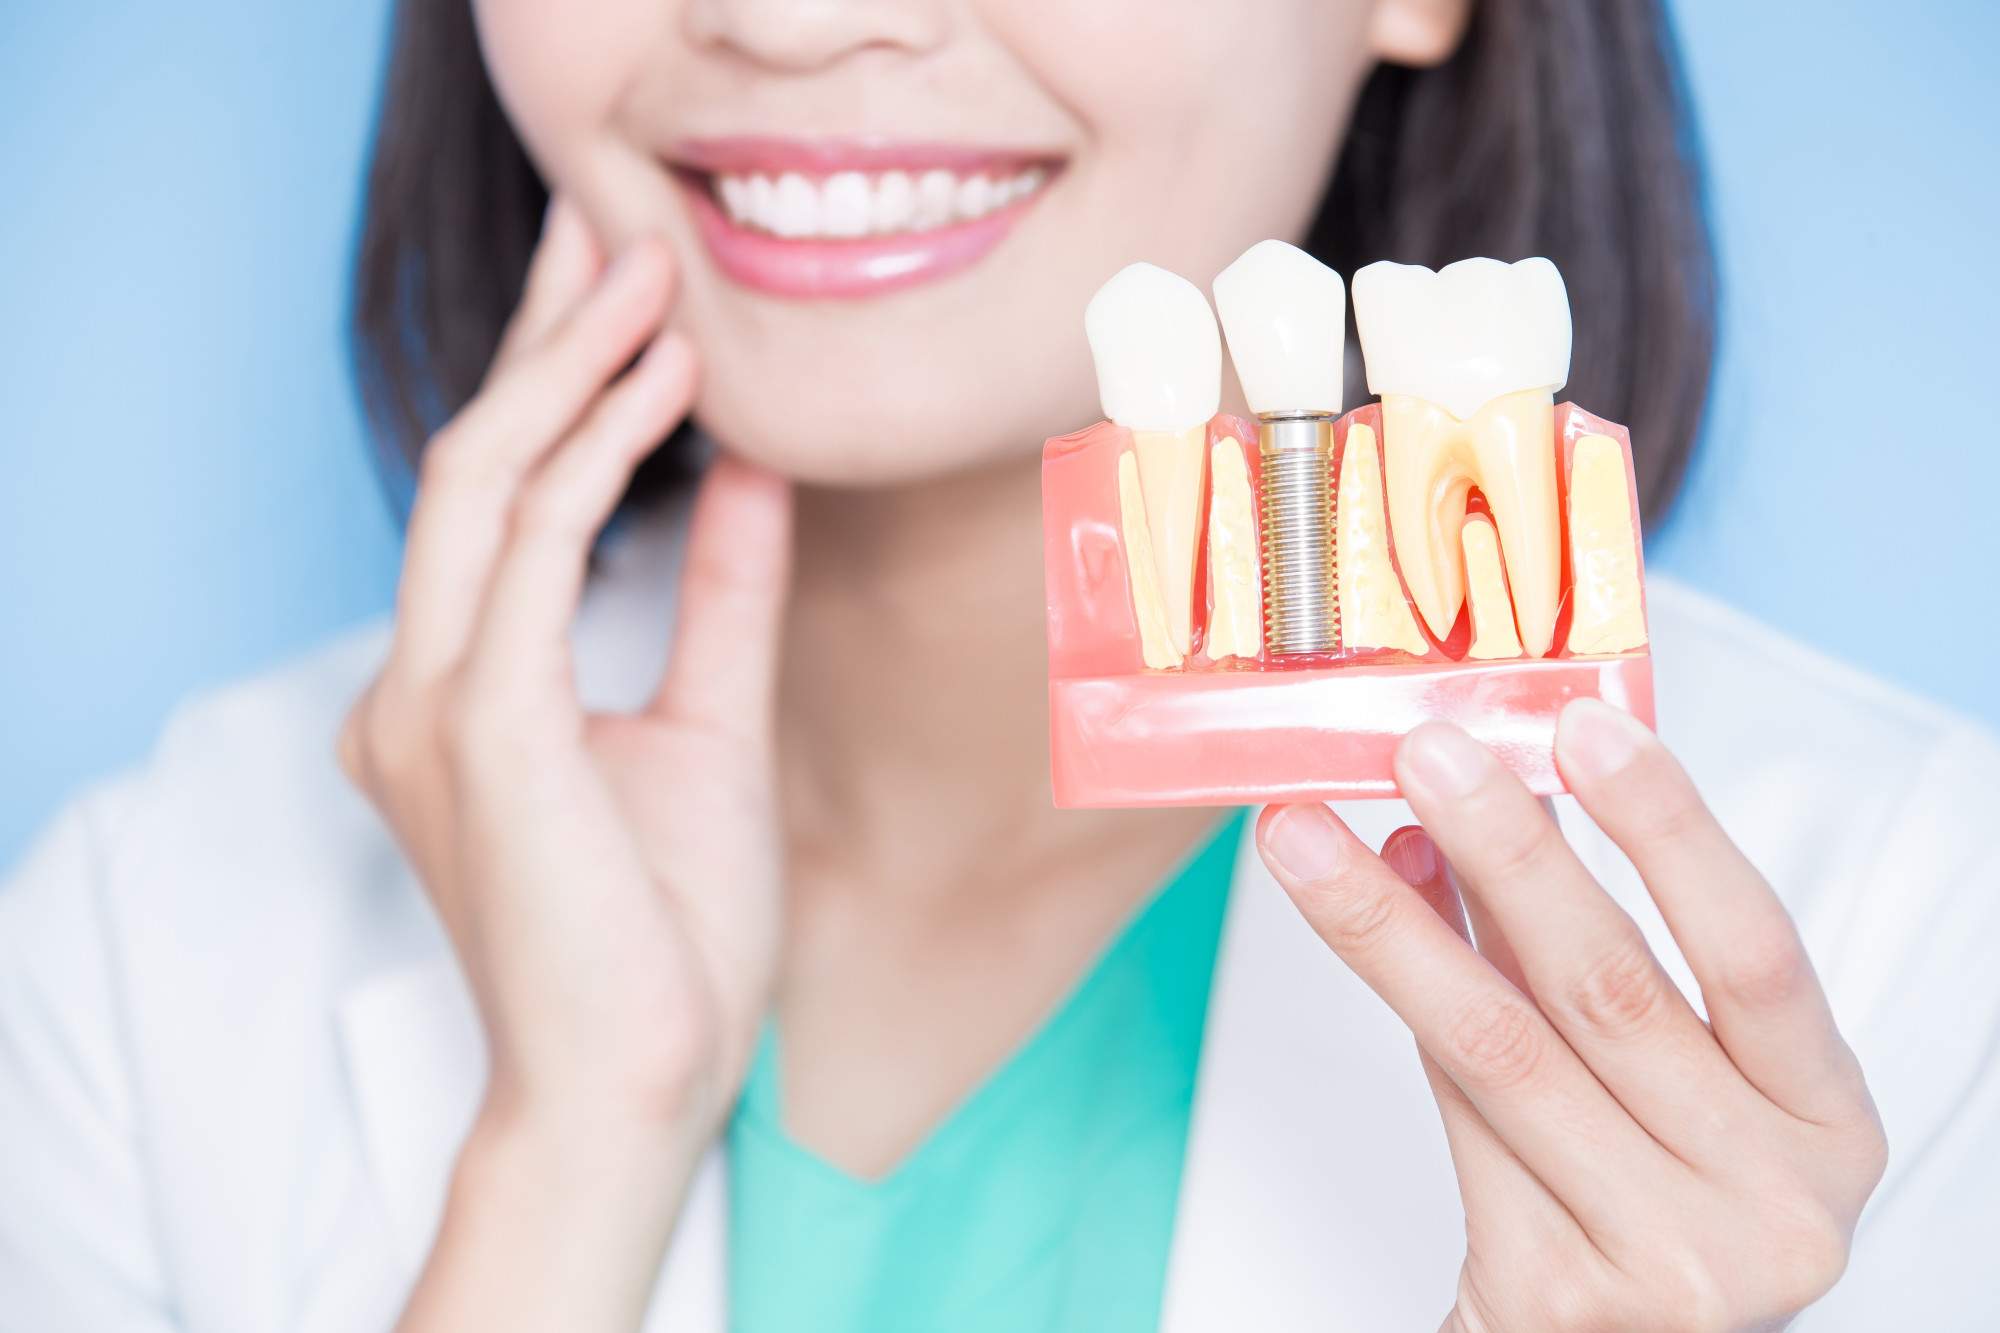 5 Questions to Ask Before Getting Dental Implants